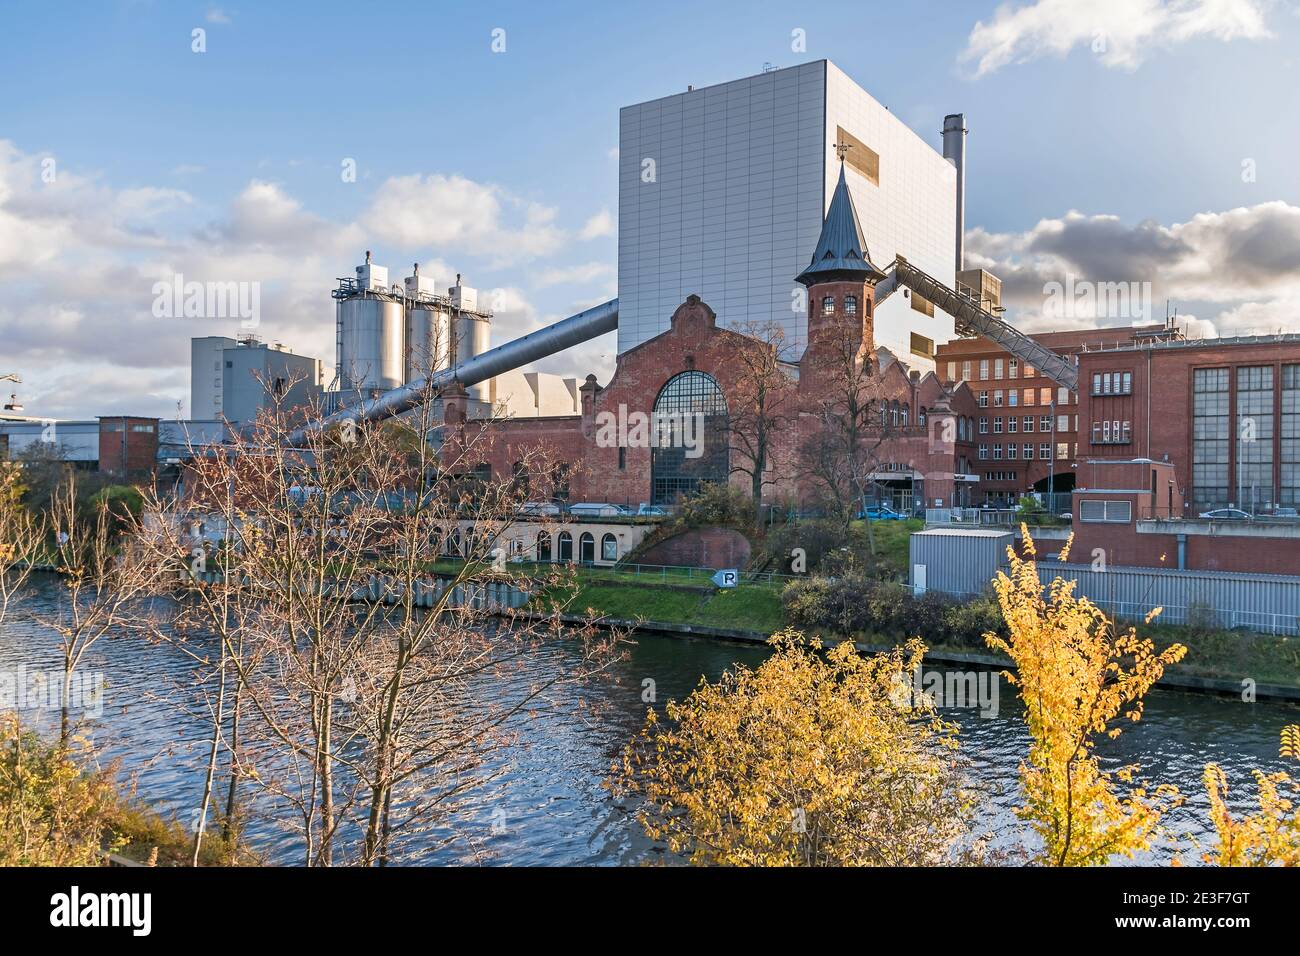 Berlin, Germany - November 23, 2020: Combined heat and power plant Moabit with its historical built in 1900 listet building on the bank  Friedrich-Kra Stock Photo